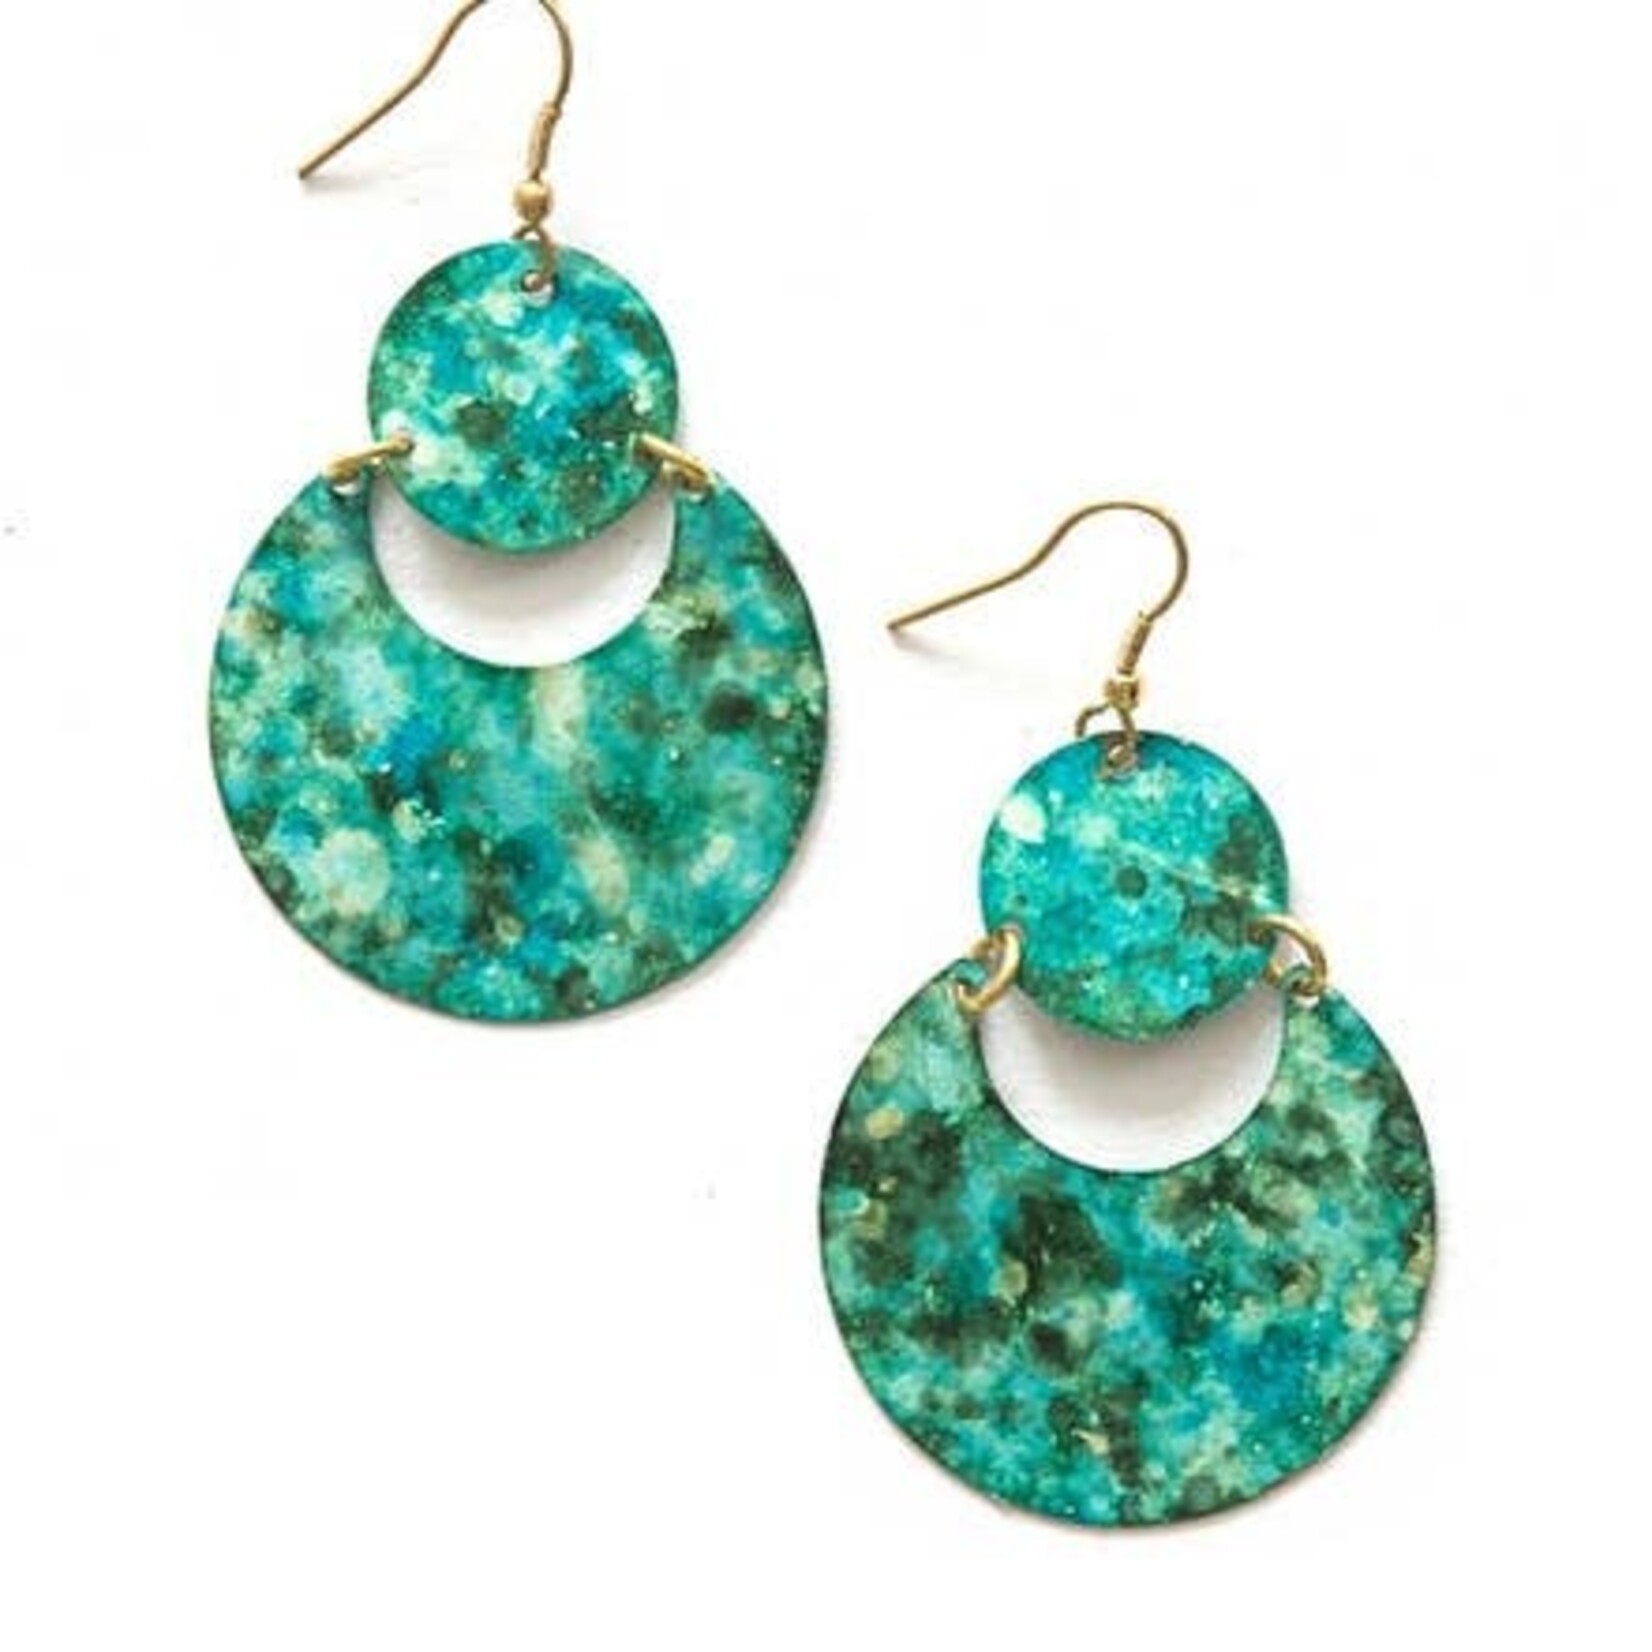 Fair Anita Cloudy Waters Turquoise Painted Earrings, India